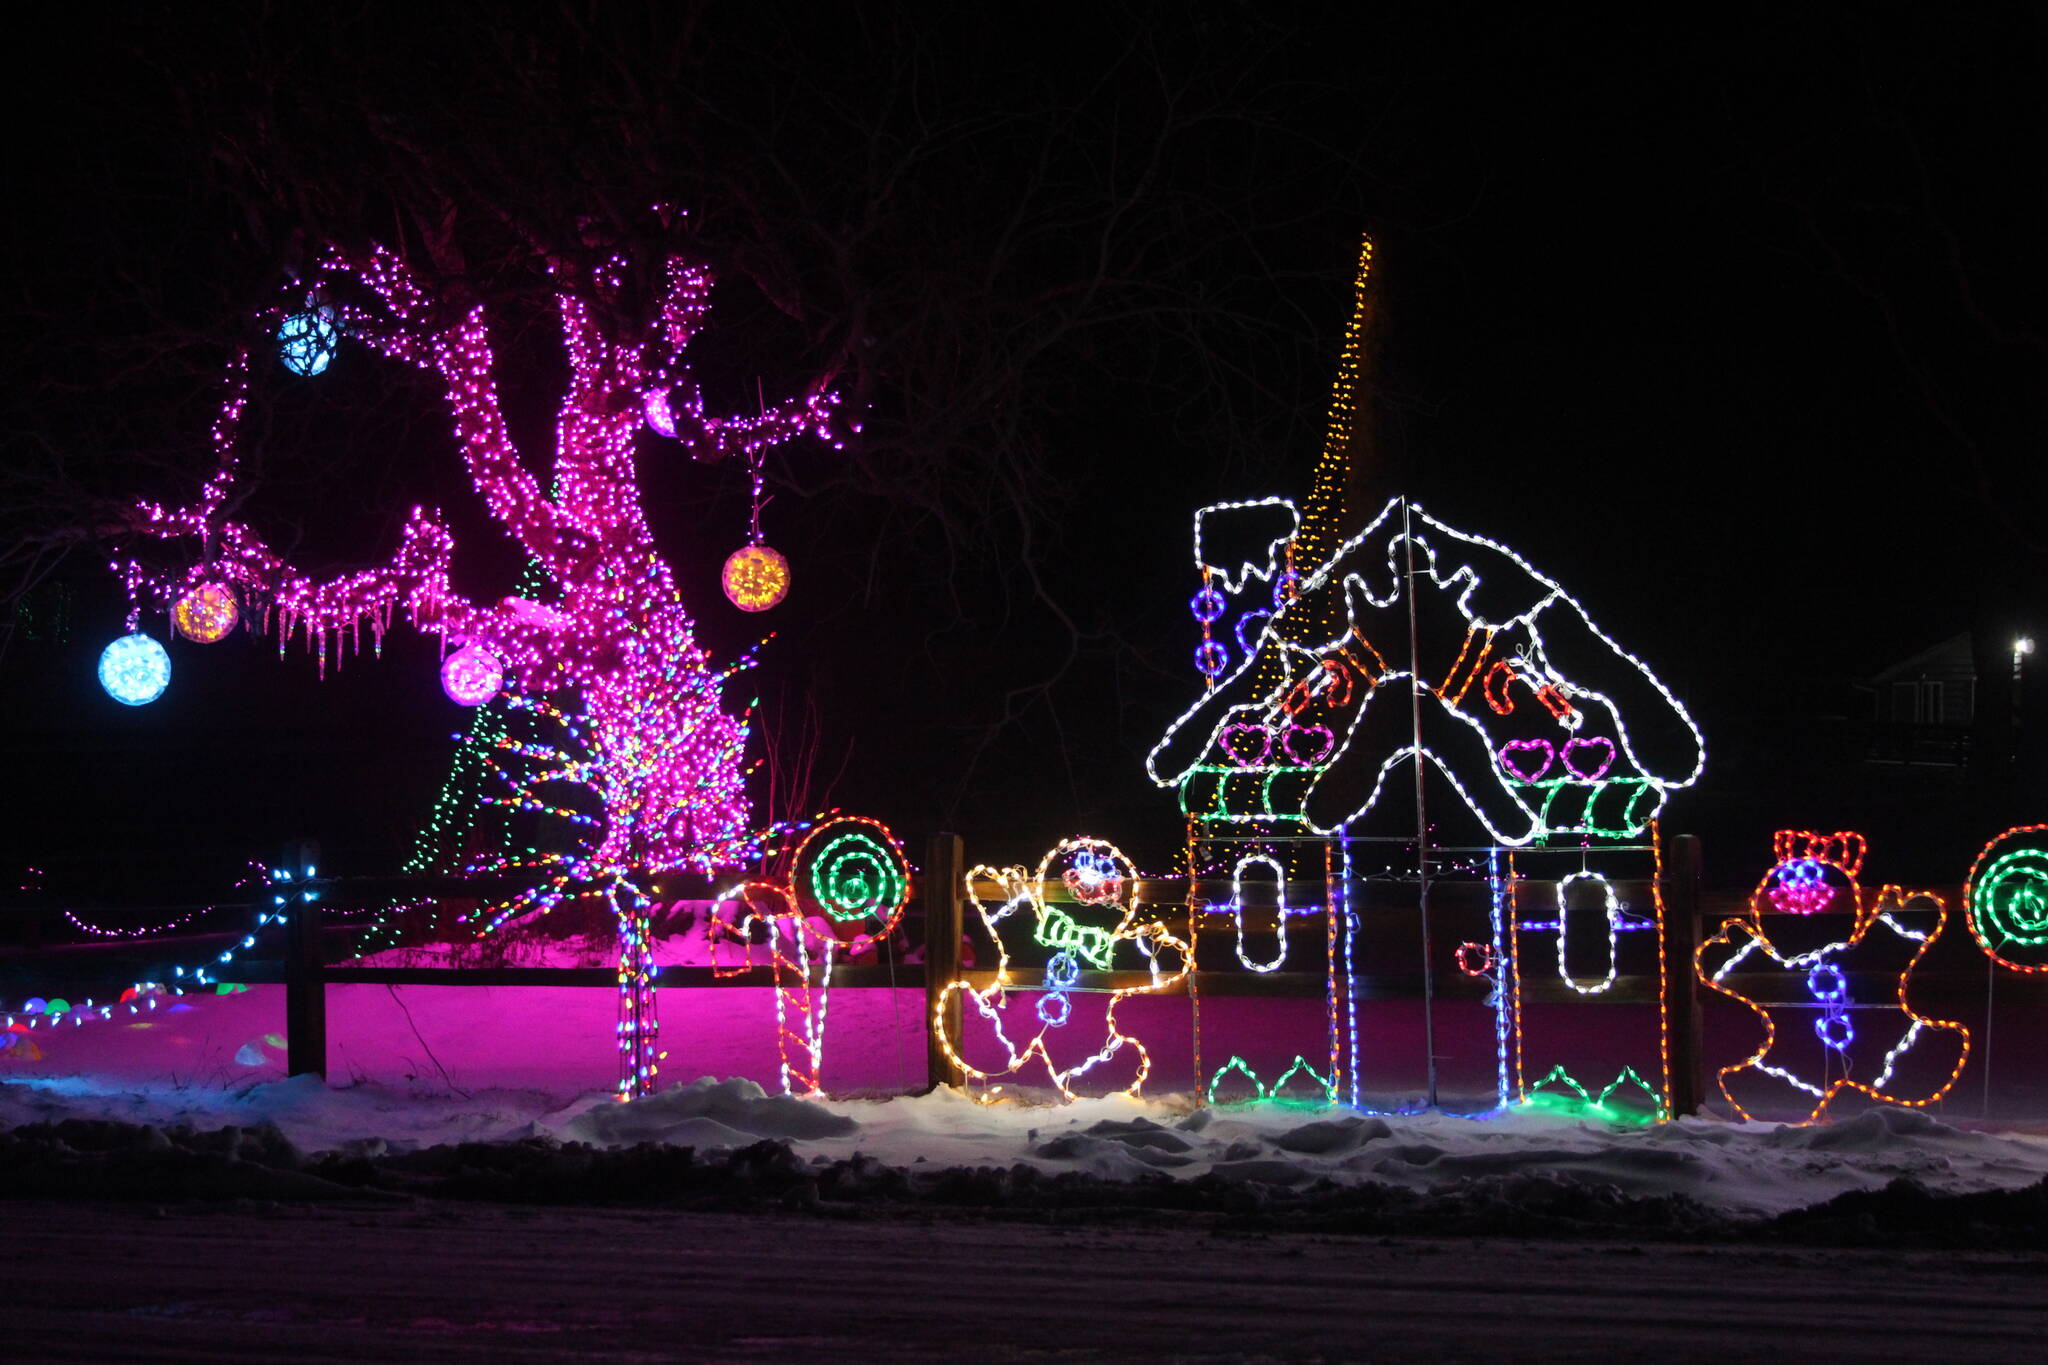 An extravagant light display at the corner of Hastie Lake Road and West Beach Road features a variety of characters, from Christmas classics like Santa Claus, reindeer and gingerbread people to less conventional holiday friends like dinosaurs, sea monsters and orcas. (Photo by Karina Andrew/Whidbey News-Times)